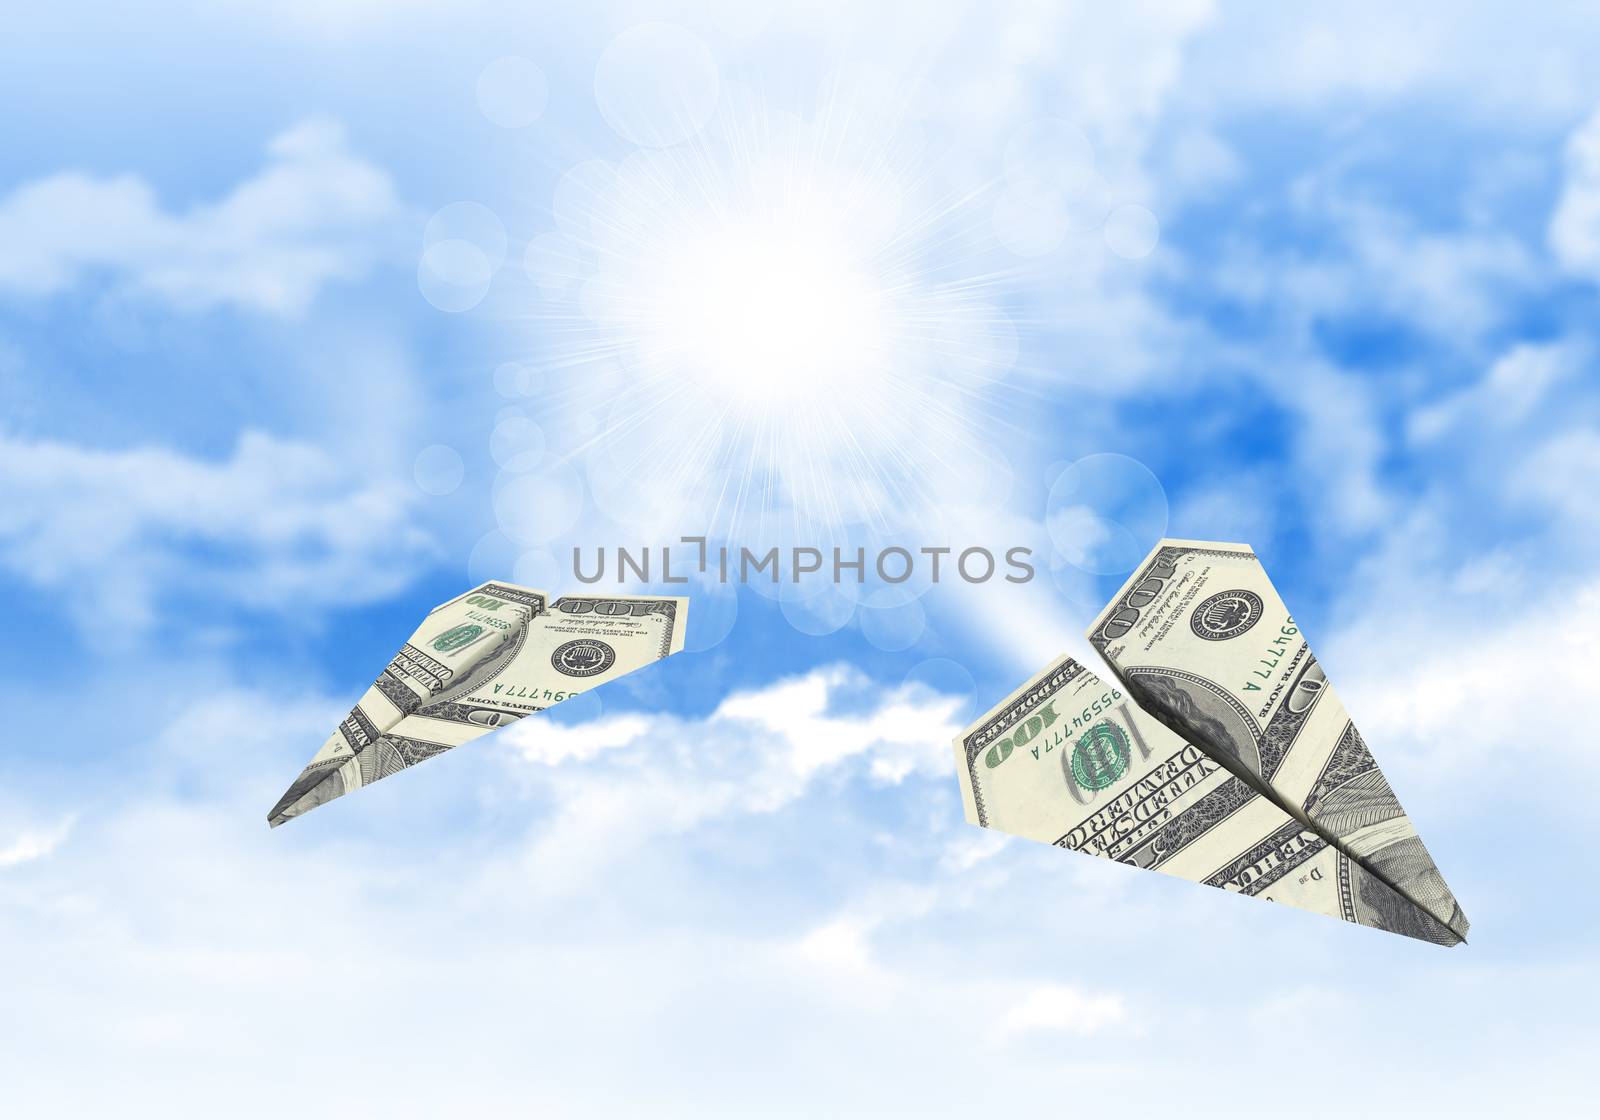 Paper airplanes made of hundred dollar bills. Sky and clouds in the background